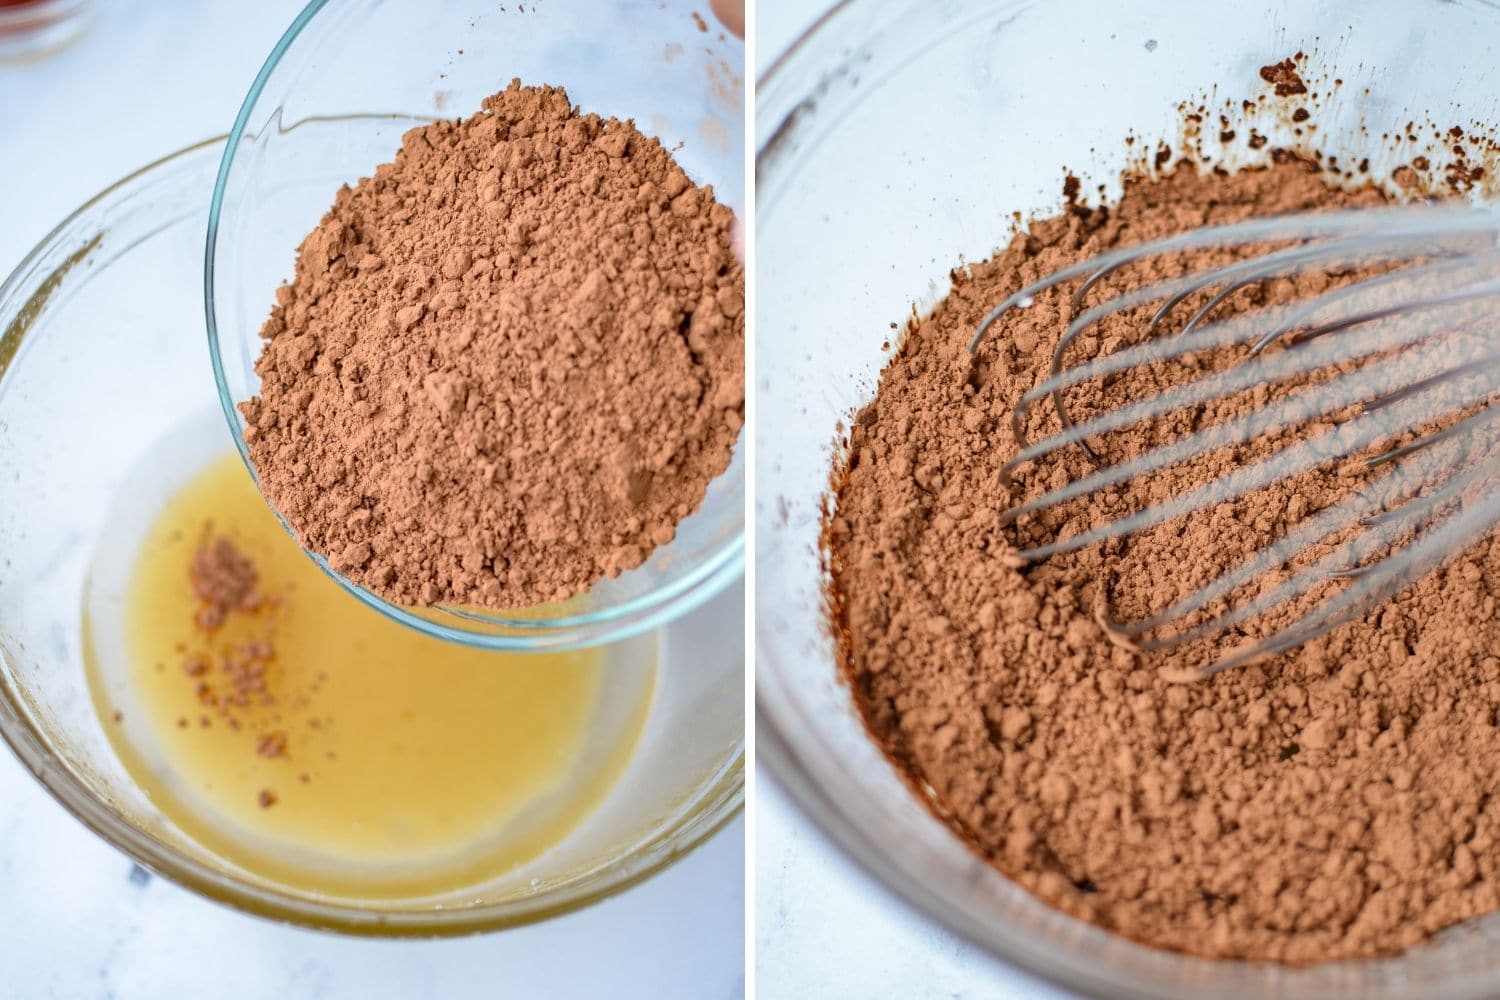 Adding cocoa powder to coconut oil and honey to make chocolate